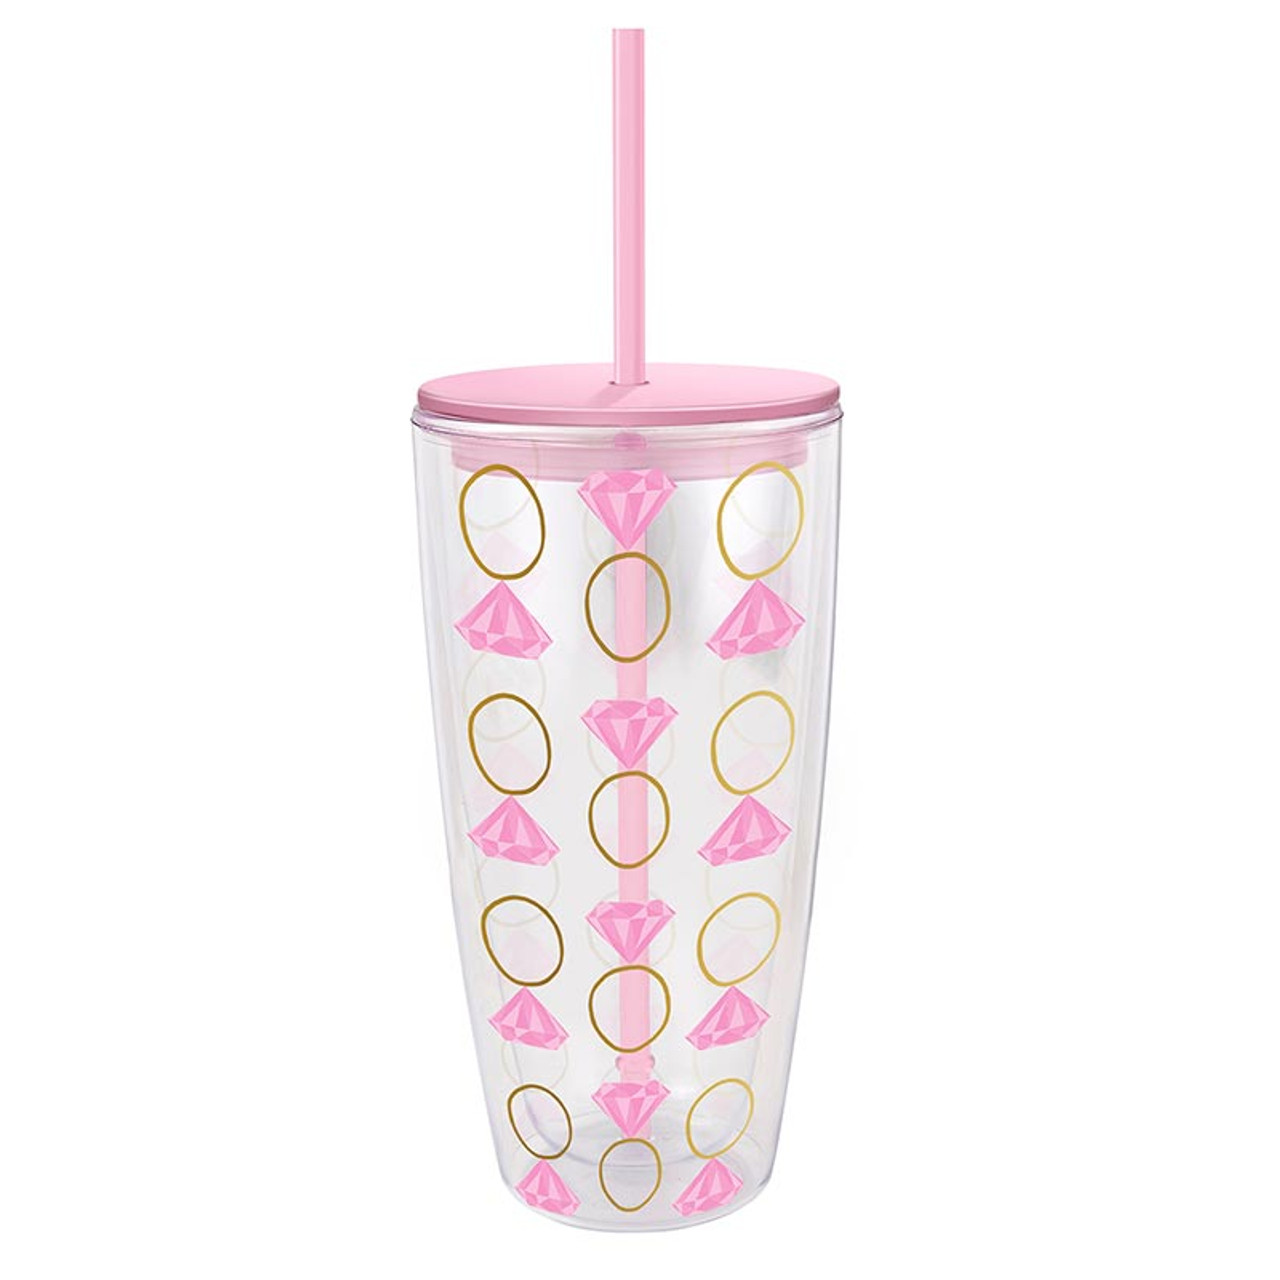 Slant Collections 22oz. Tervis Tumbler: Rings